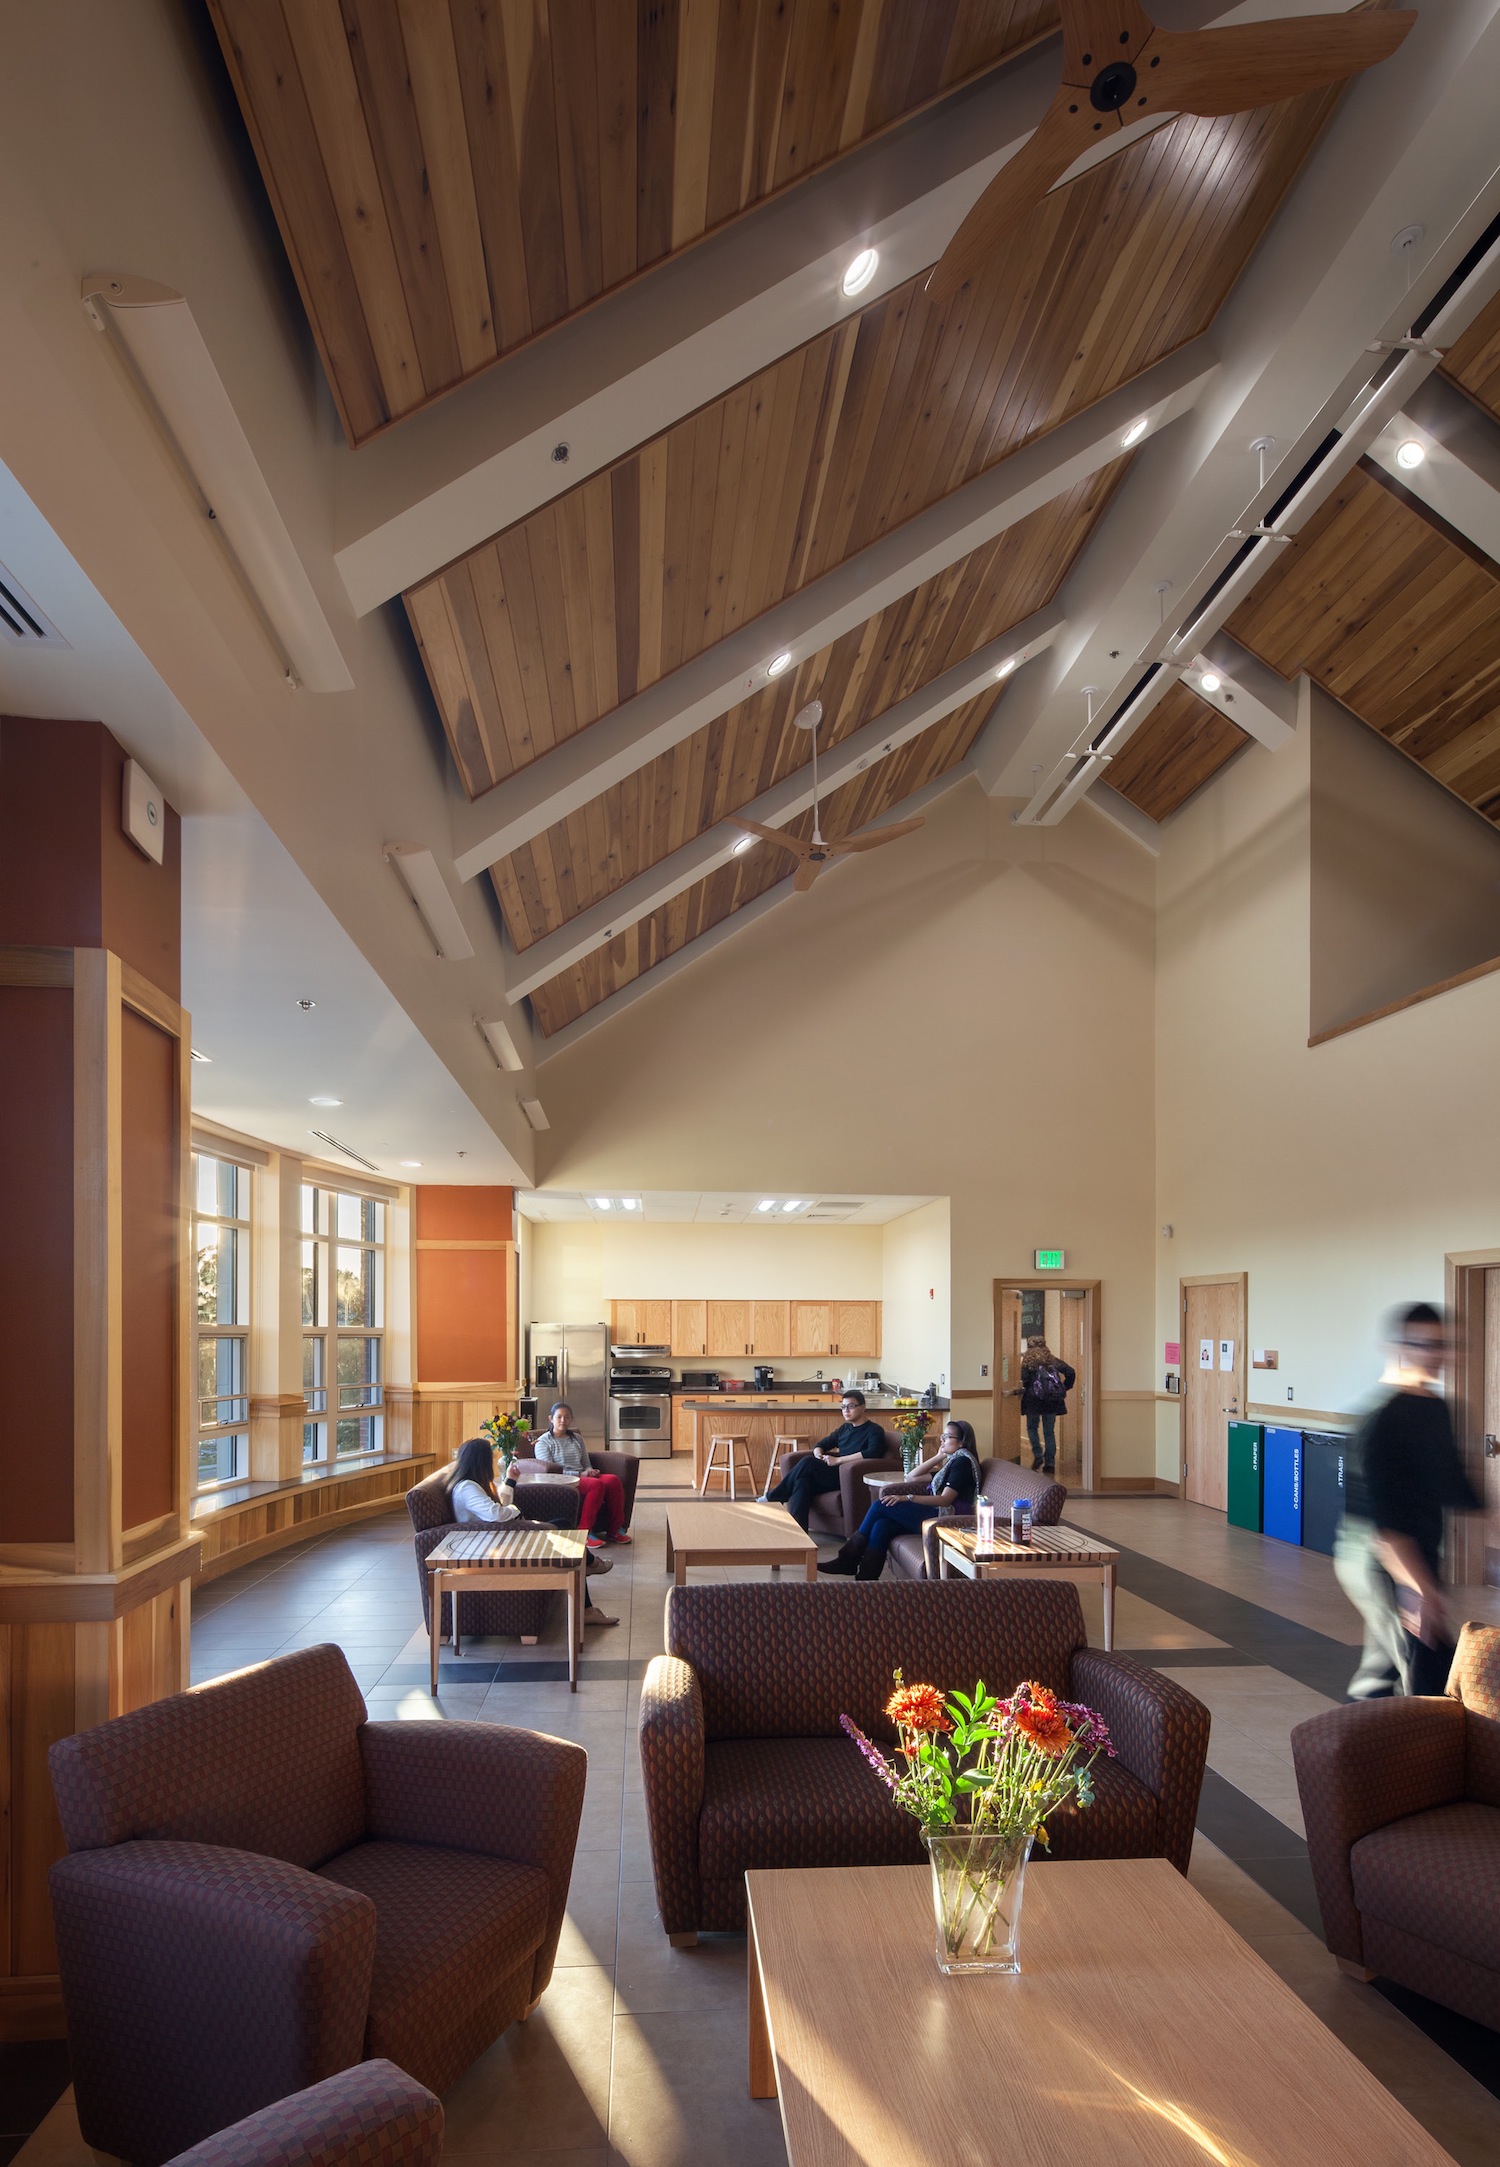 Berea Colleges Deep Green residence hall, designed by Hastings+Chivetta Archi